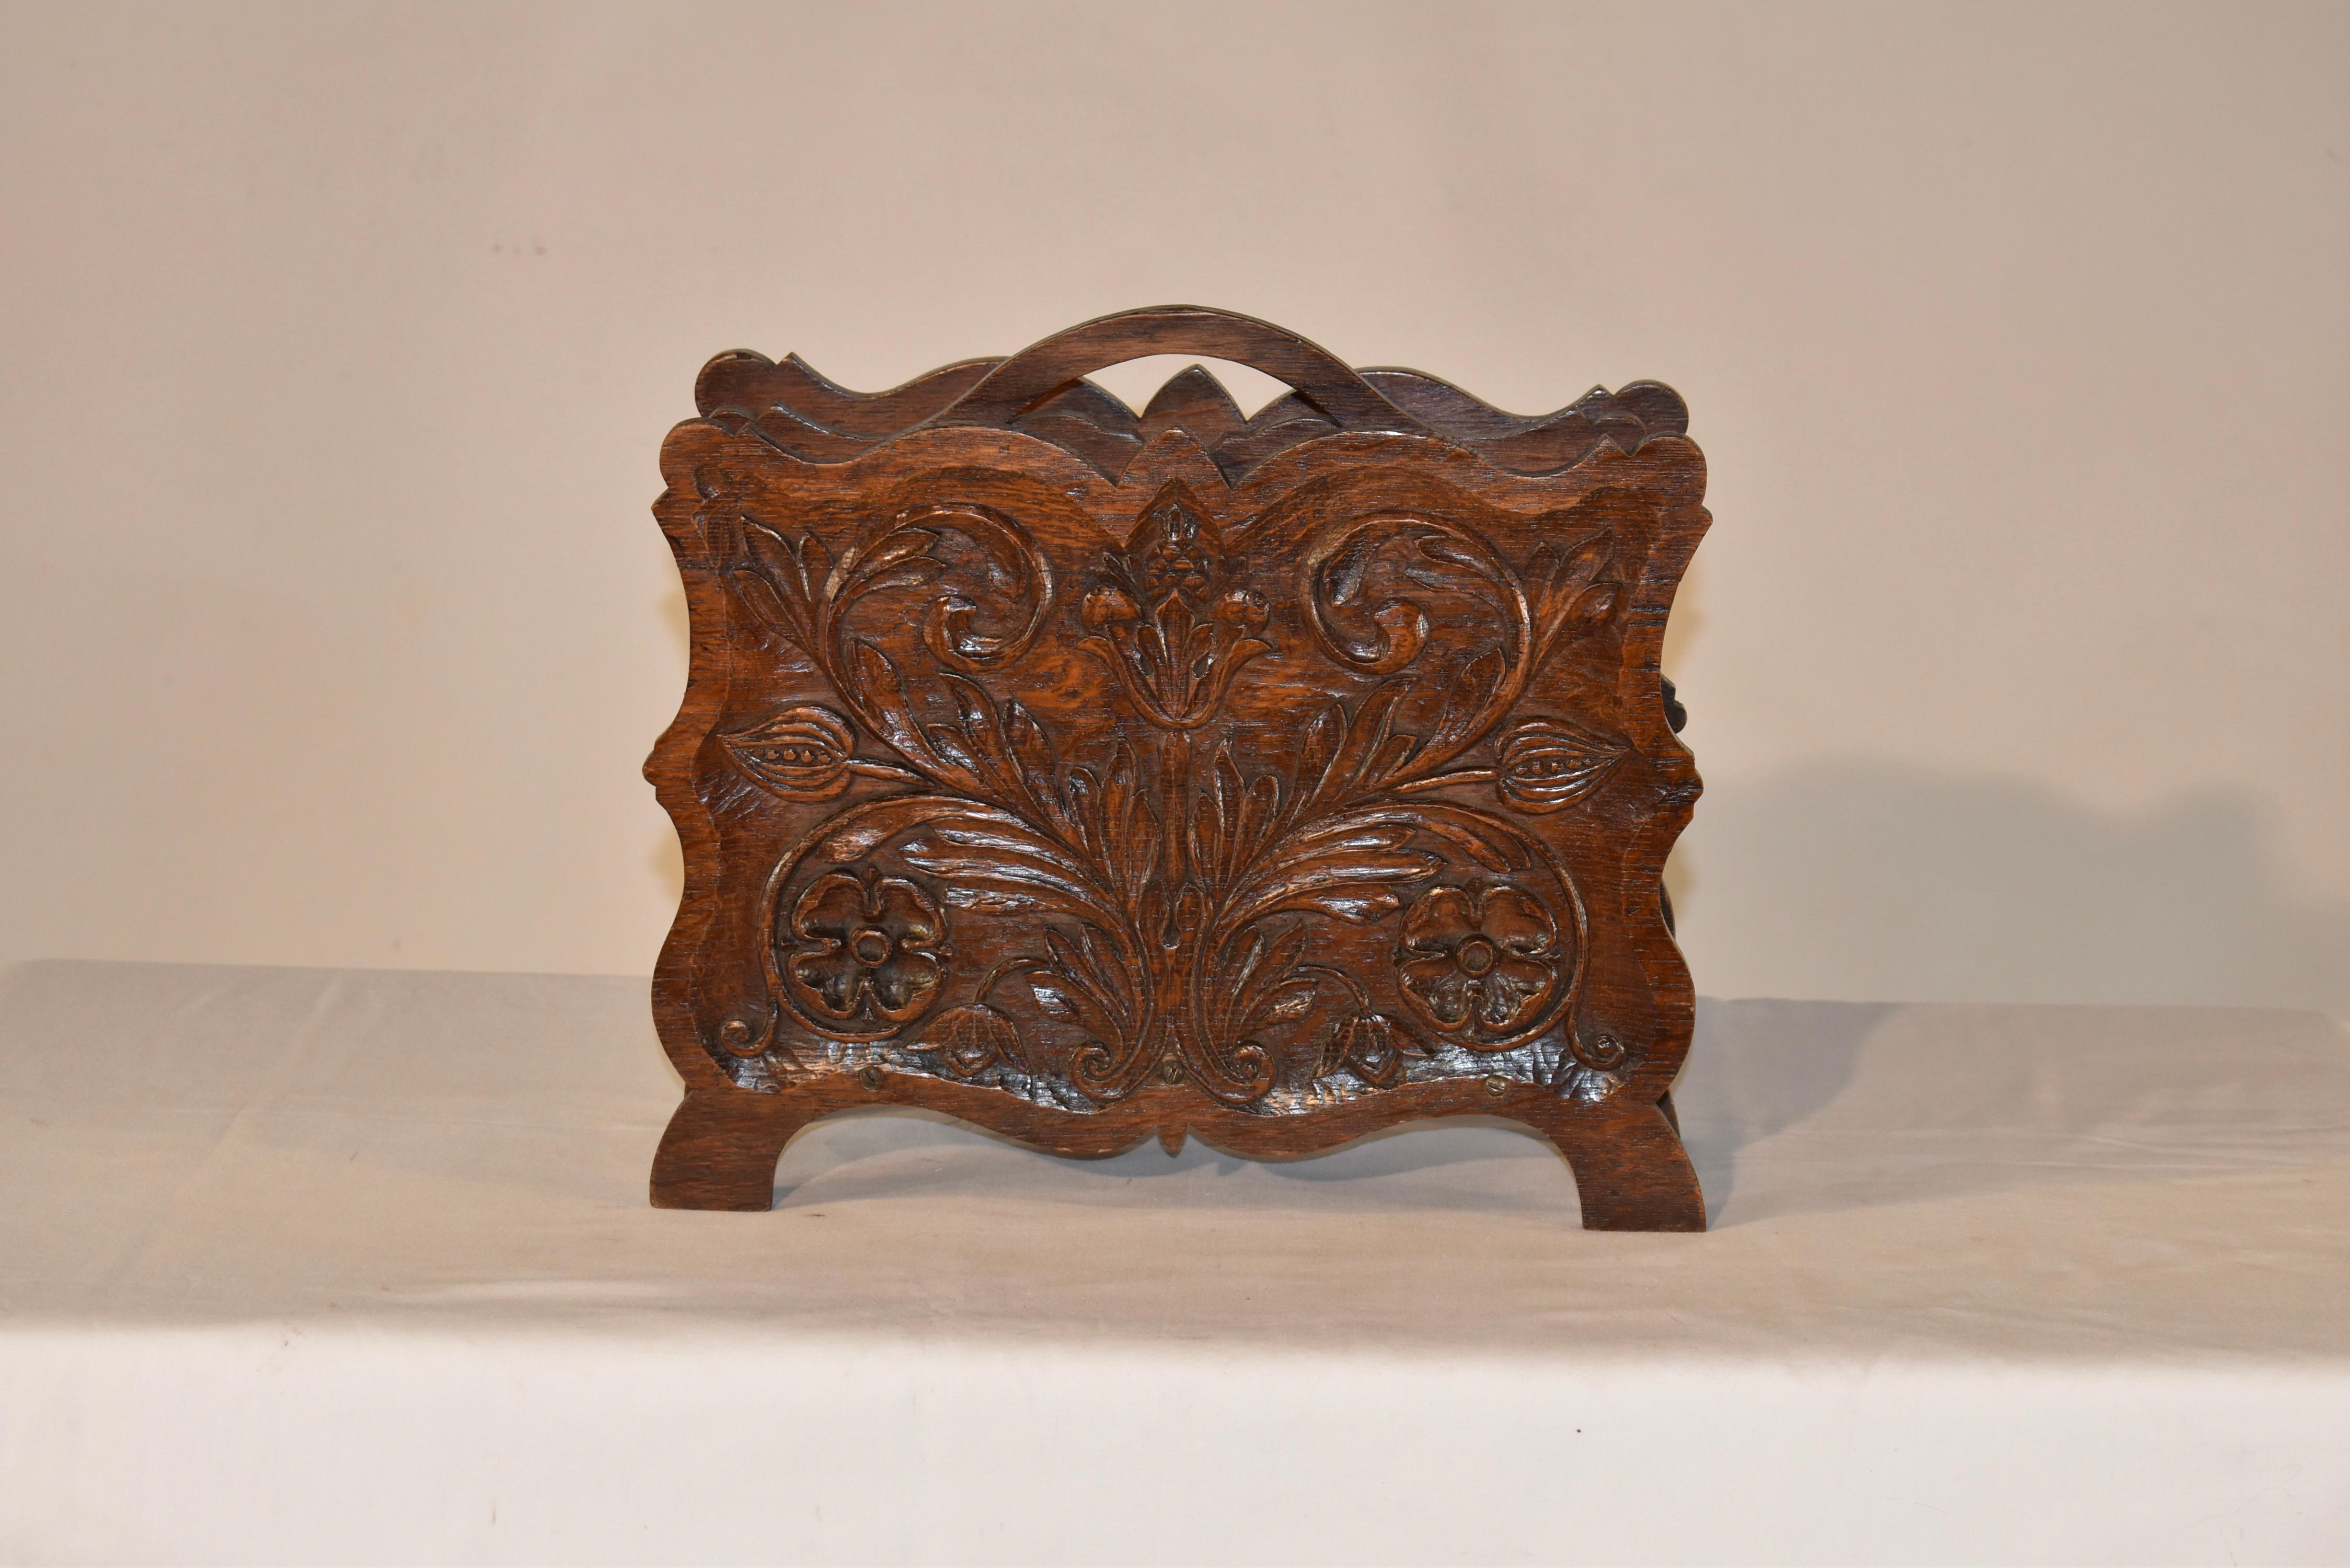 Circa 1900 period Edwardian oak magazine or music rack with three scalloped partitions. The central partition and both sides are scalloped around the edges and the two sides have hand carved decorations. One side with florals and fruits, and the